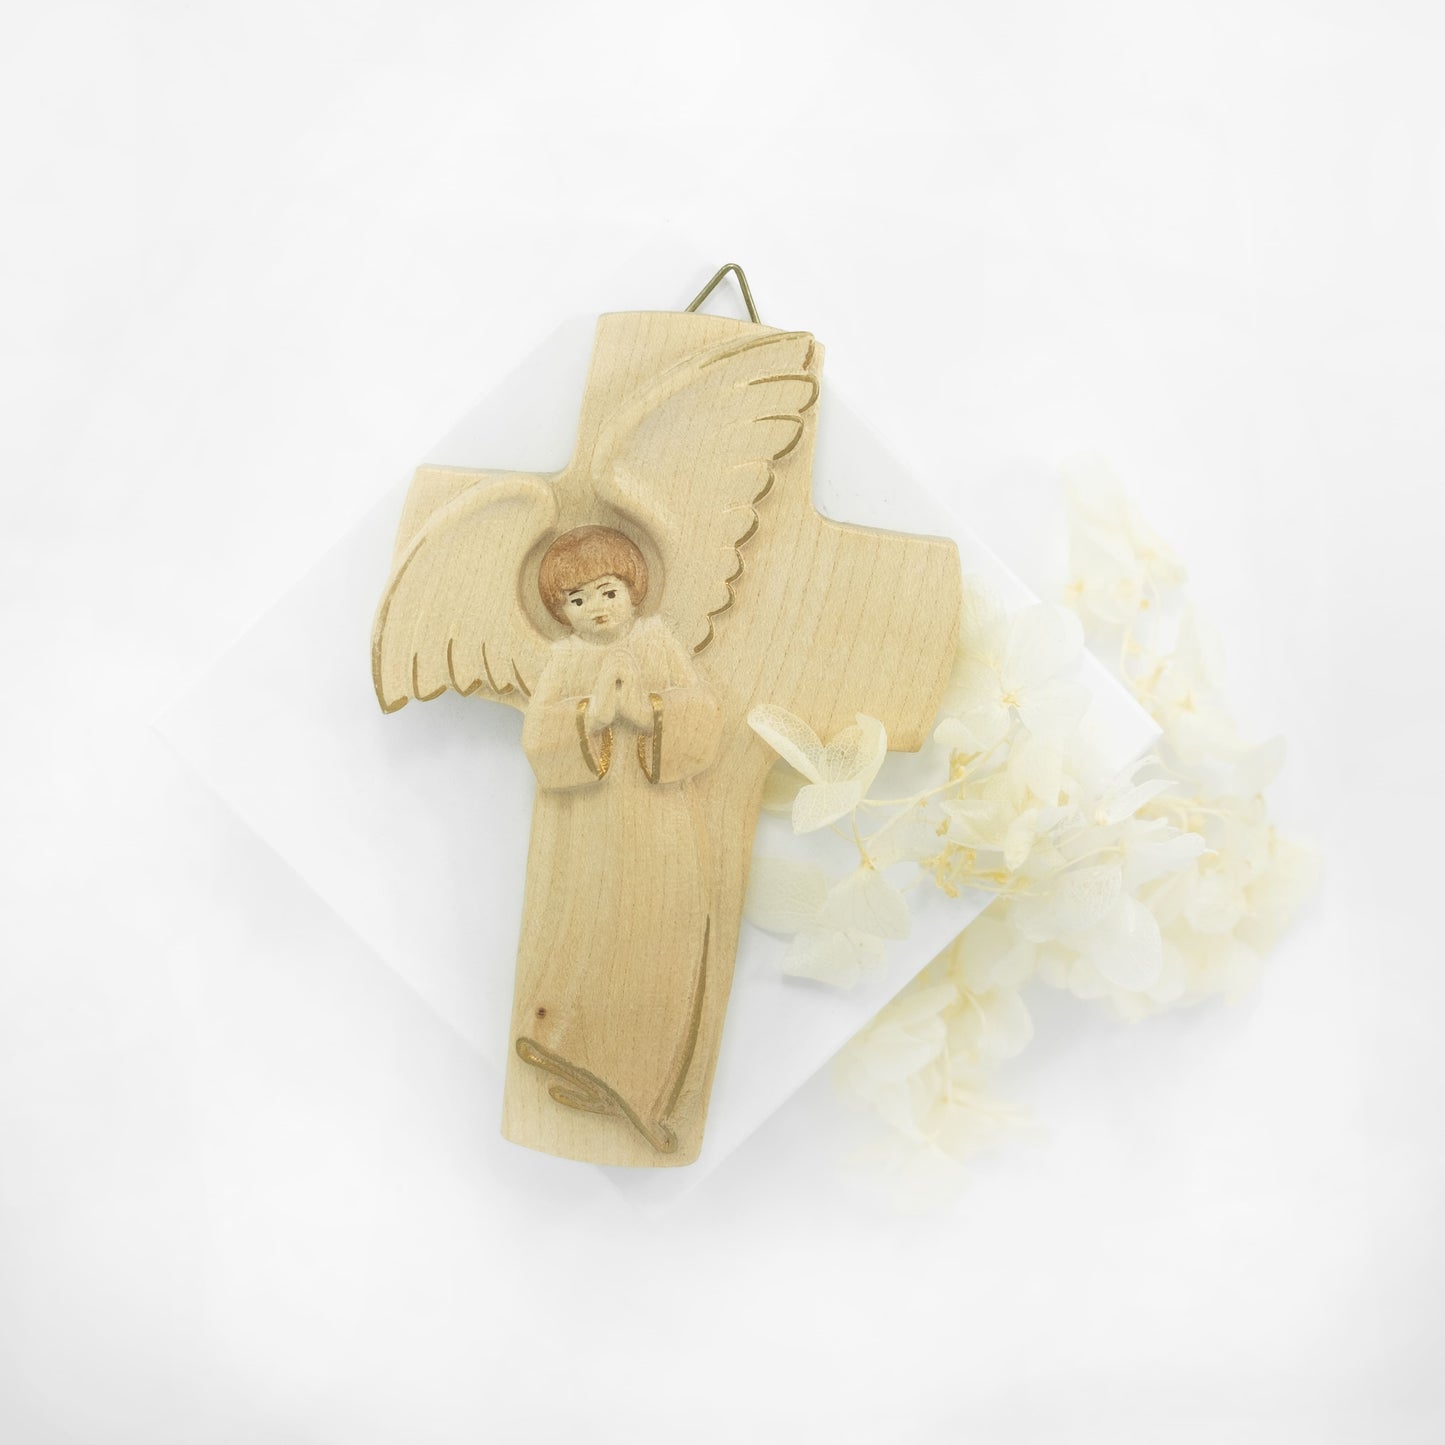 MONDO CATTOLICO 12 cm (4.72 in) Natural Wood Cross With Angel